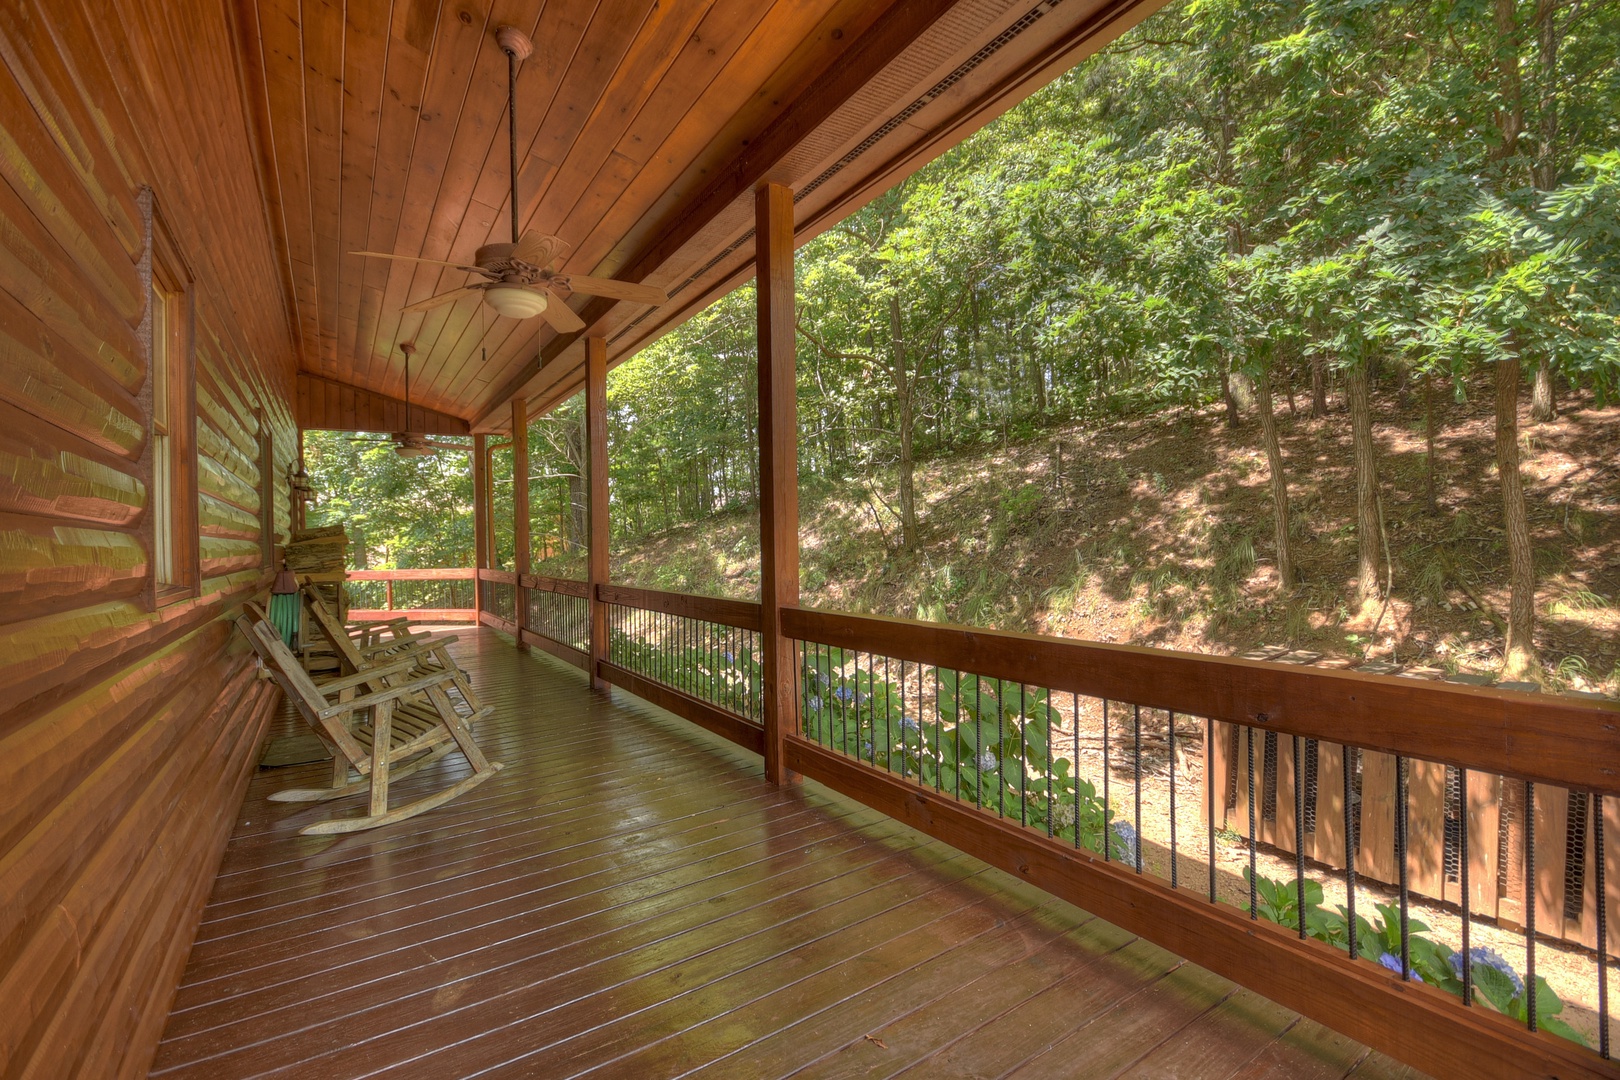 Above Ravens Ridge- Entry level deck area with rocking chairs